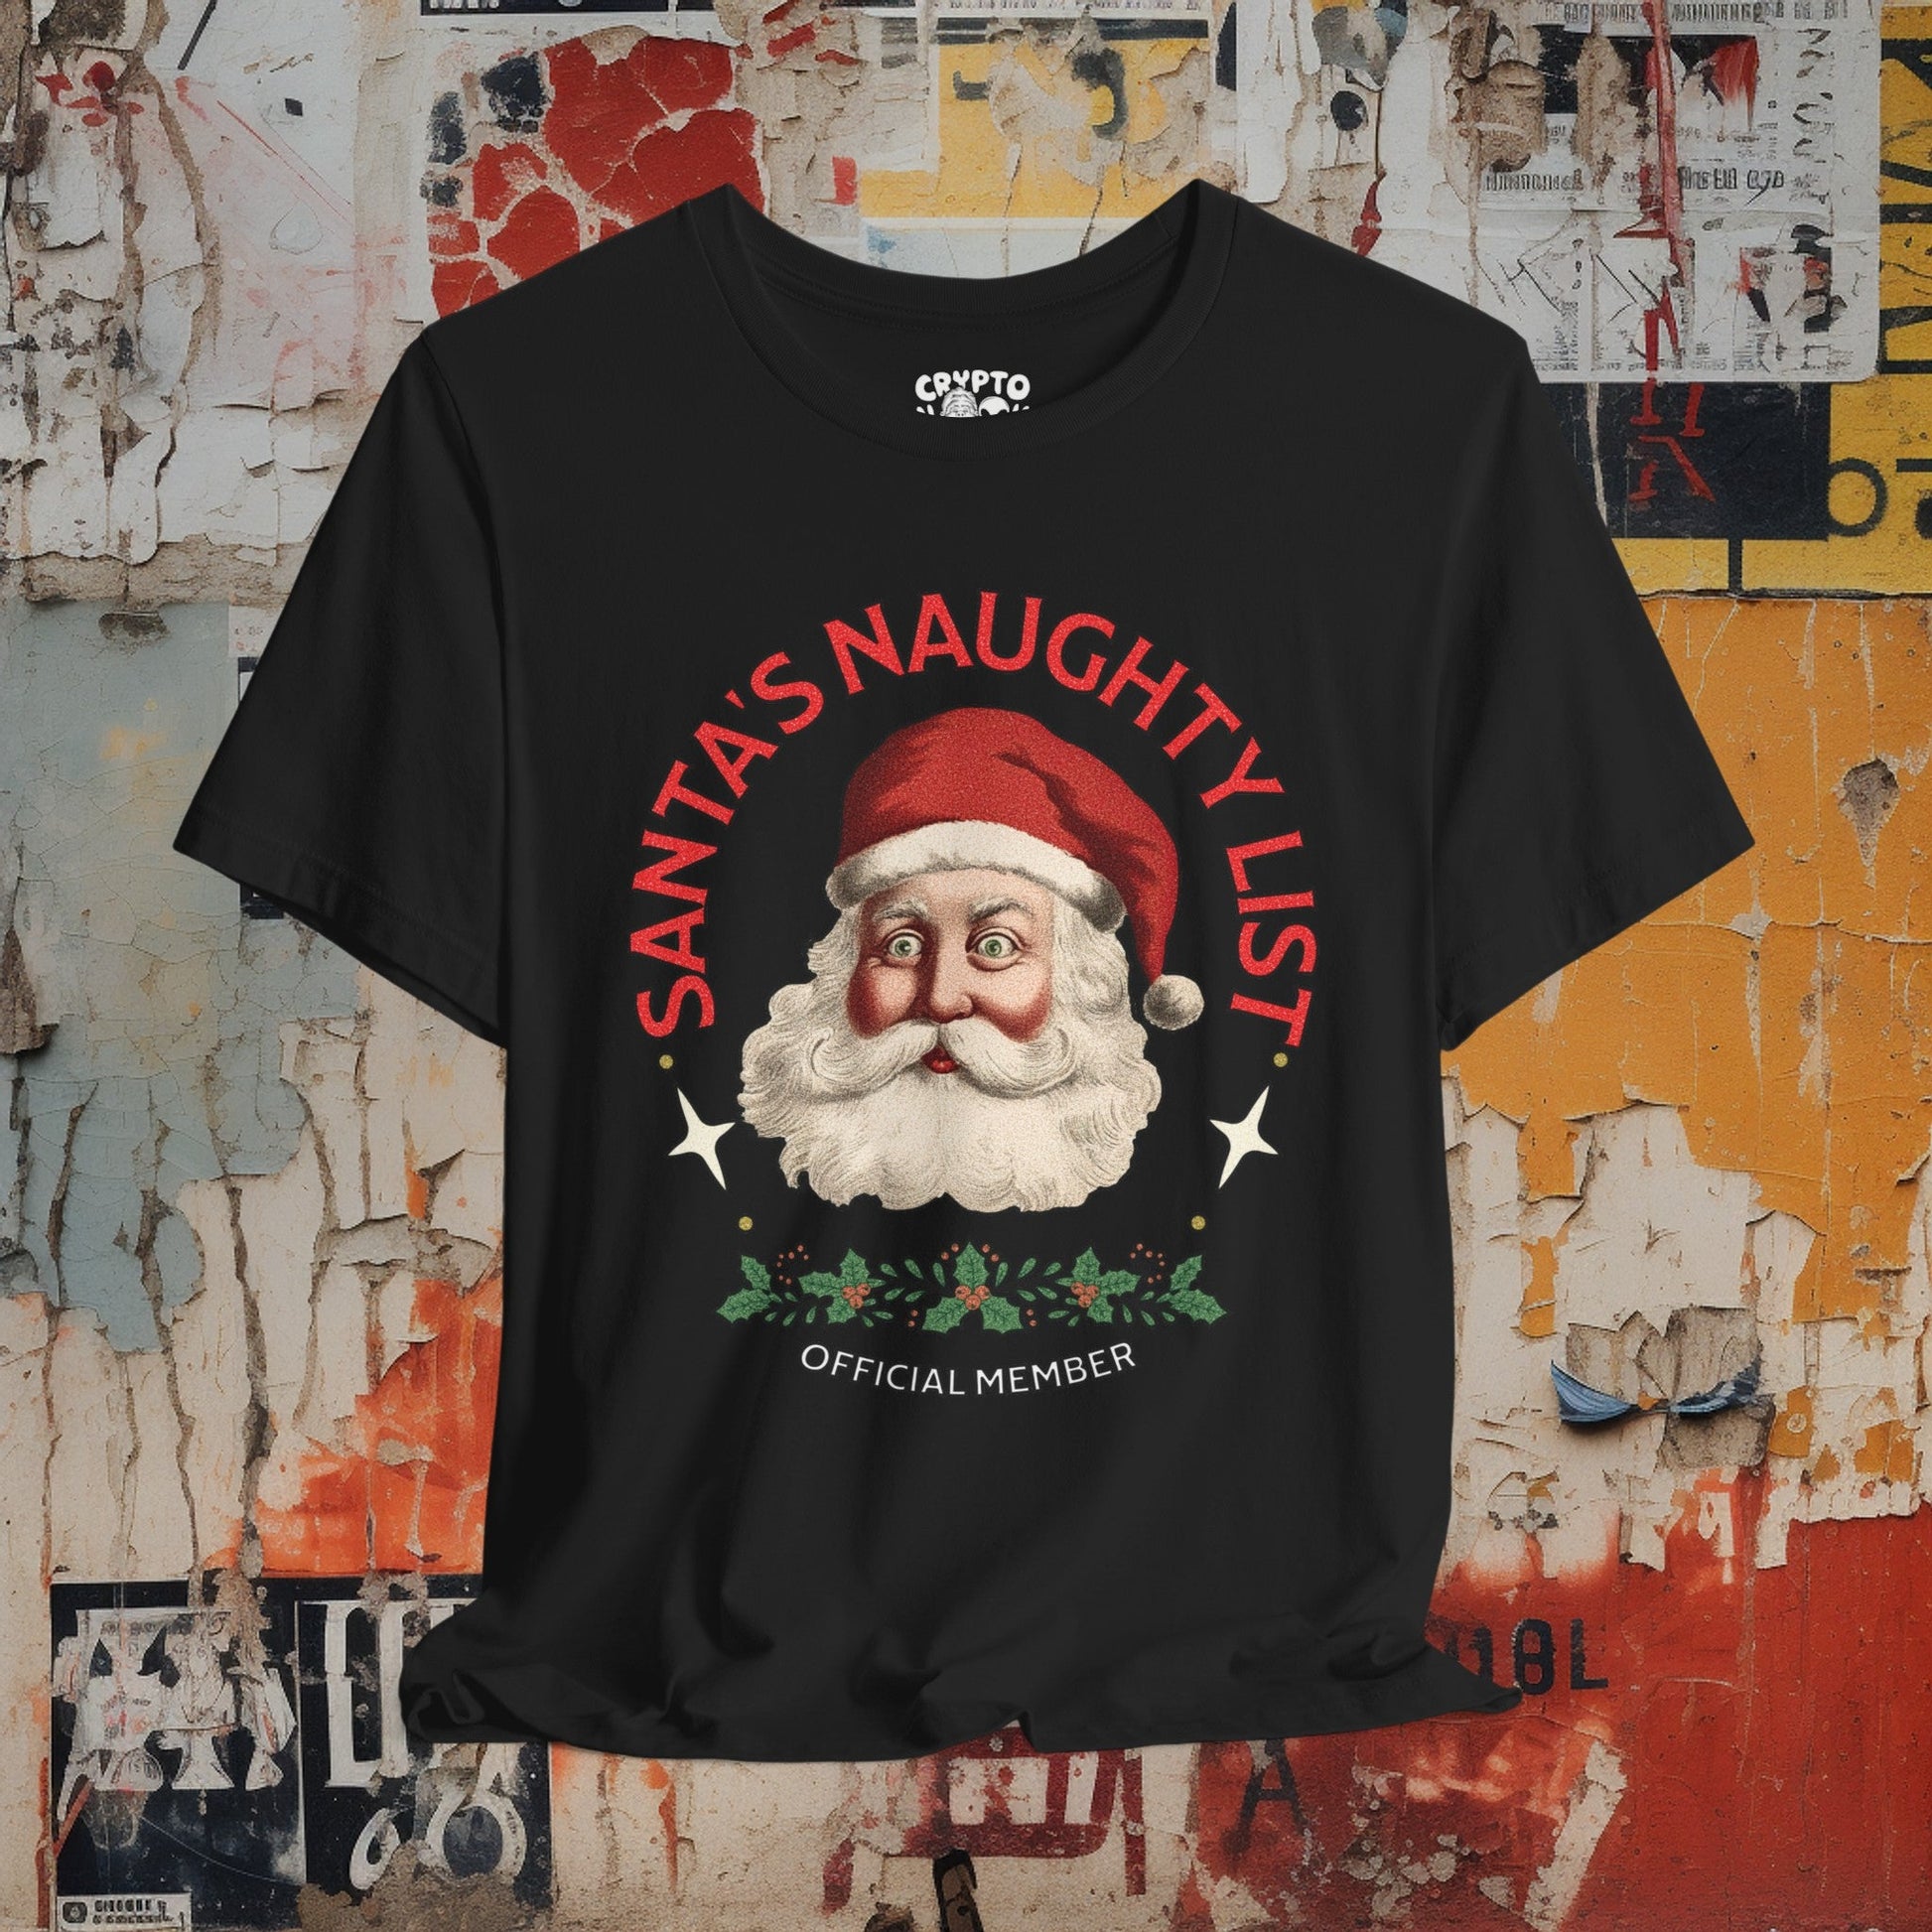 T-Shirt - Santa's Naughty List Official Member Tee | Funny Christmas Shirt | Bella + Canvas Unisex T-shirt from Crypto Zoo Tees